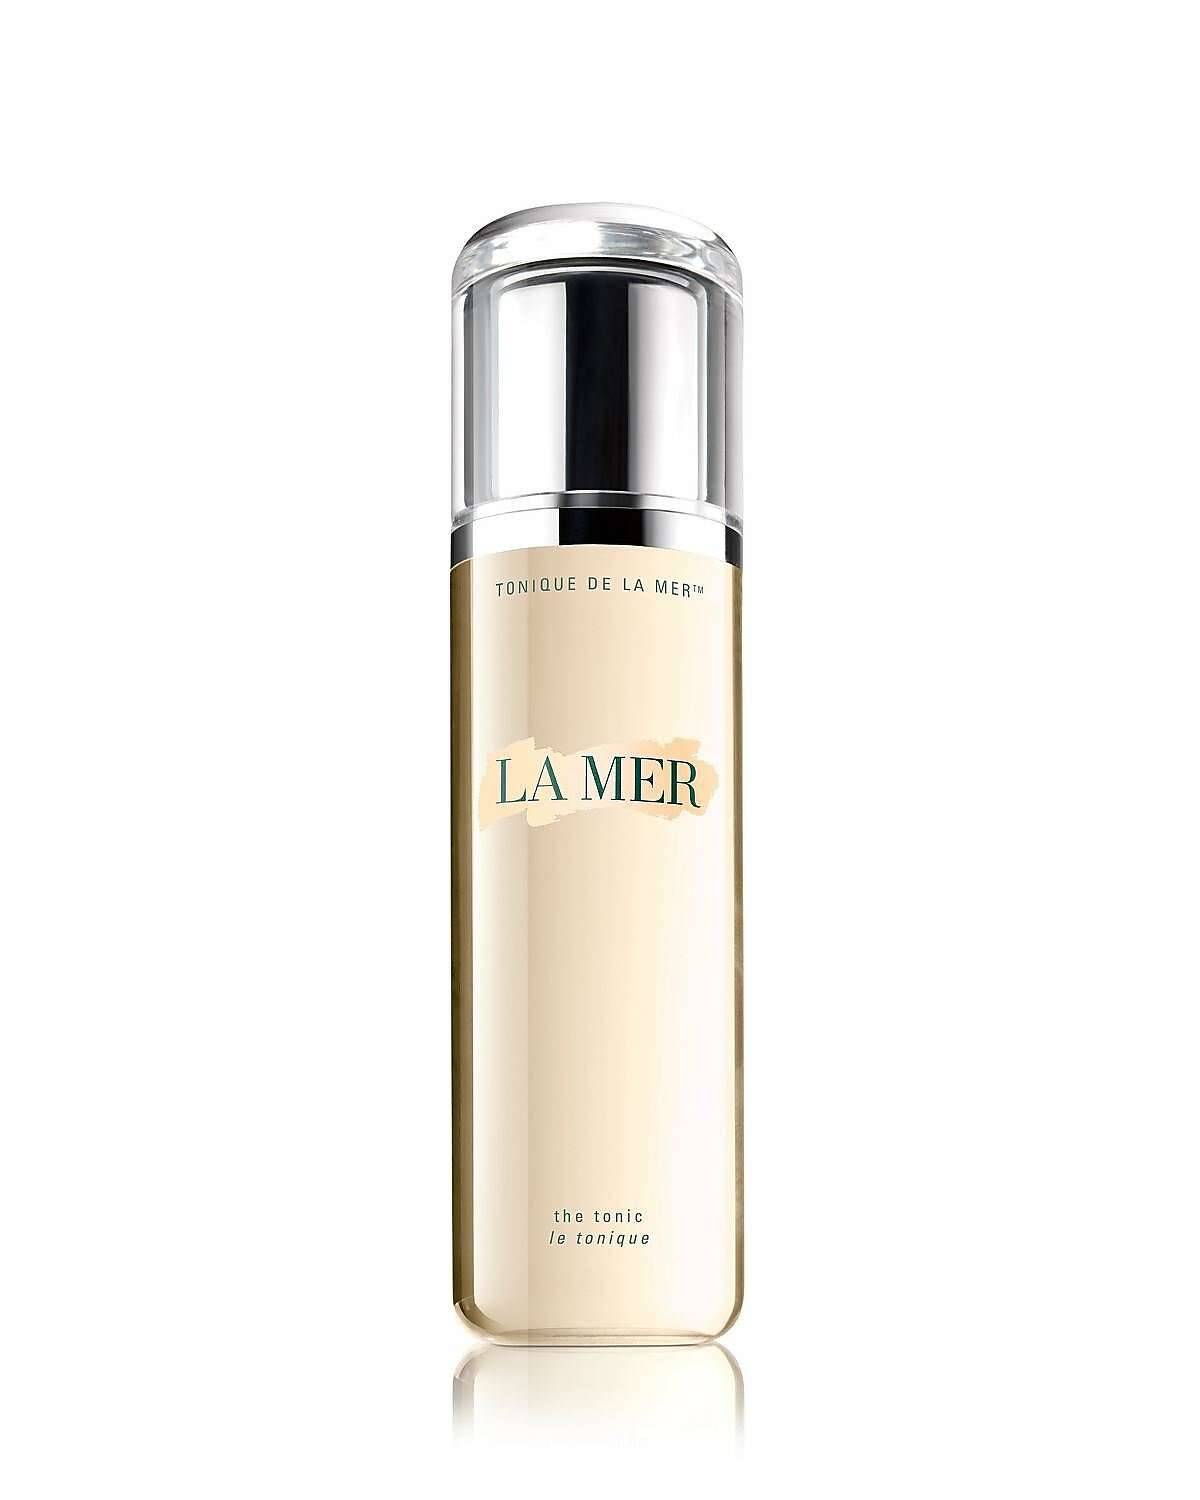 Bloomingdale's in San Francisco offers facials using La Mer, Dior and La Prairie products.